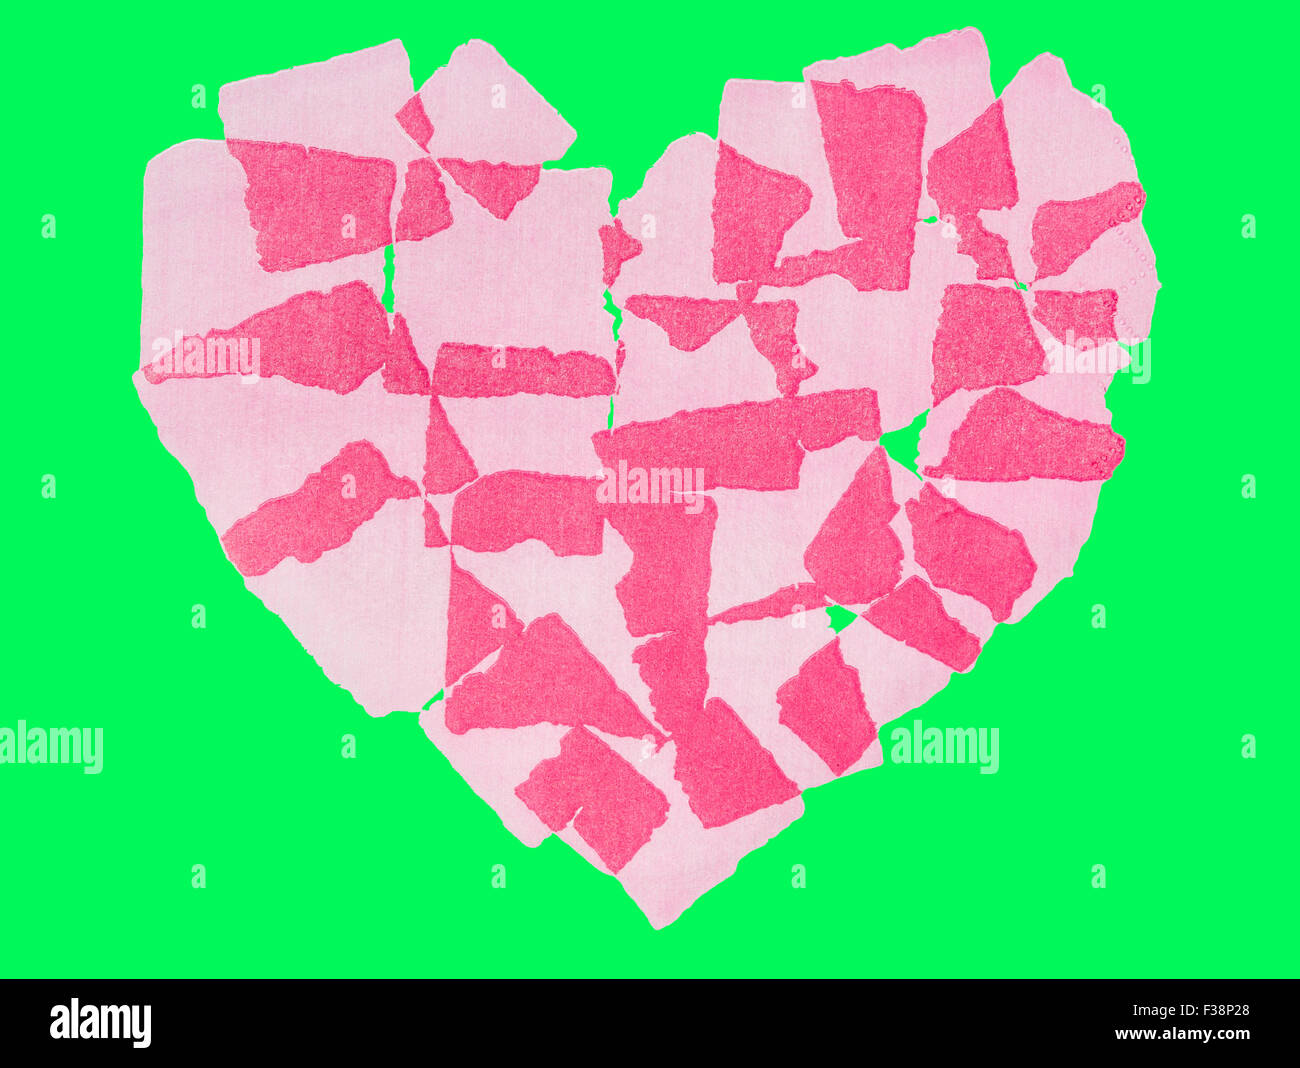 Heart paper abstact Isolated on green screen chroma key background. Stock Photo